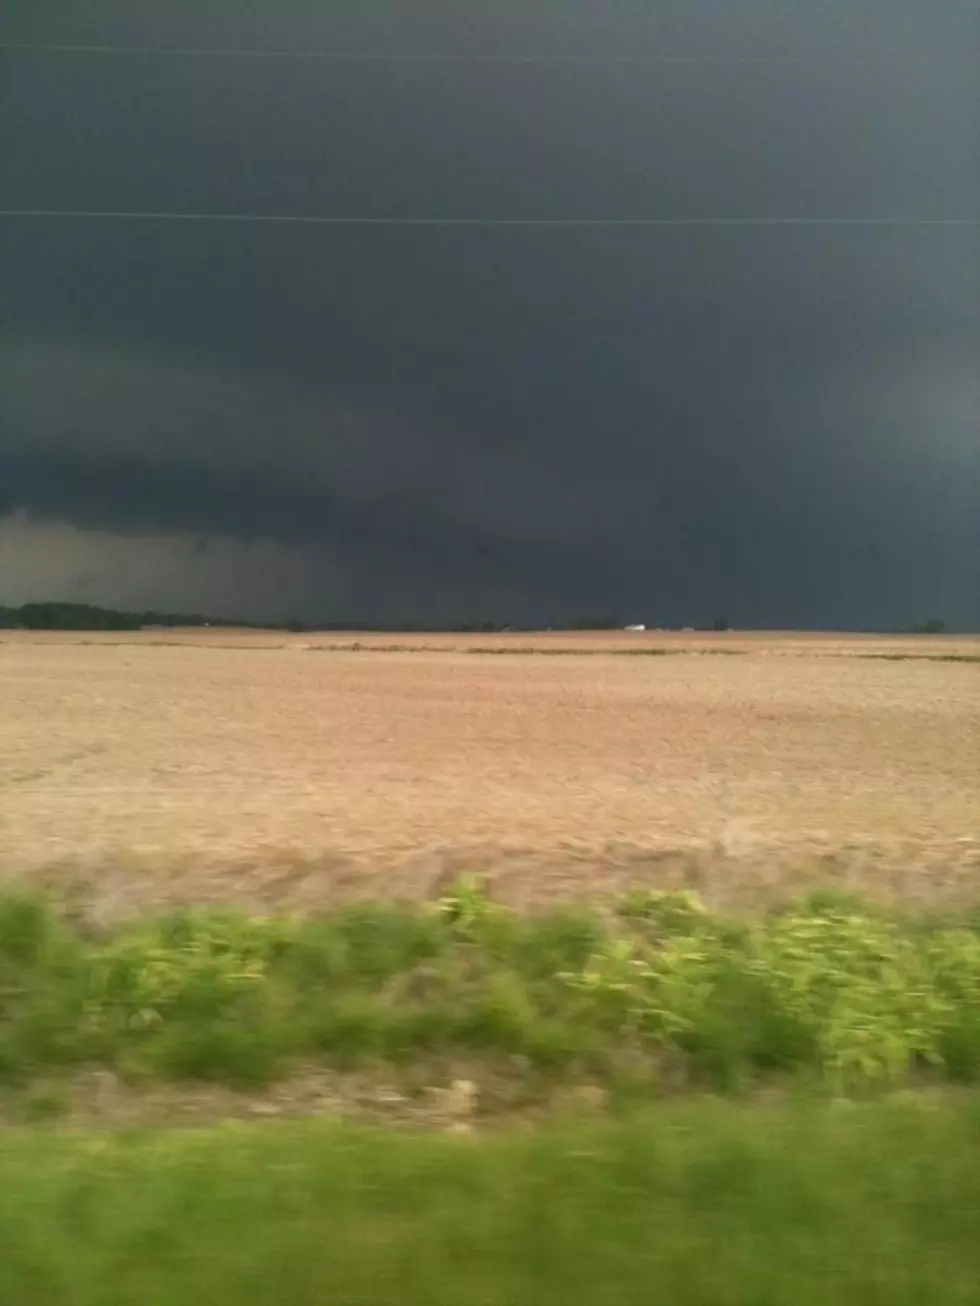 Severe Storms Trigger Tornado Warning for Knox County, Indiana [Pictures]